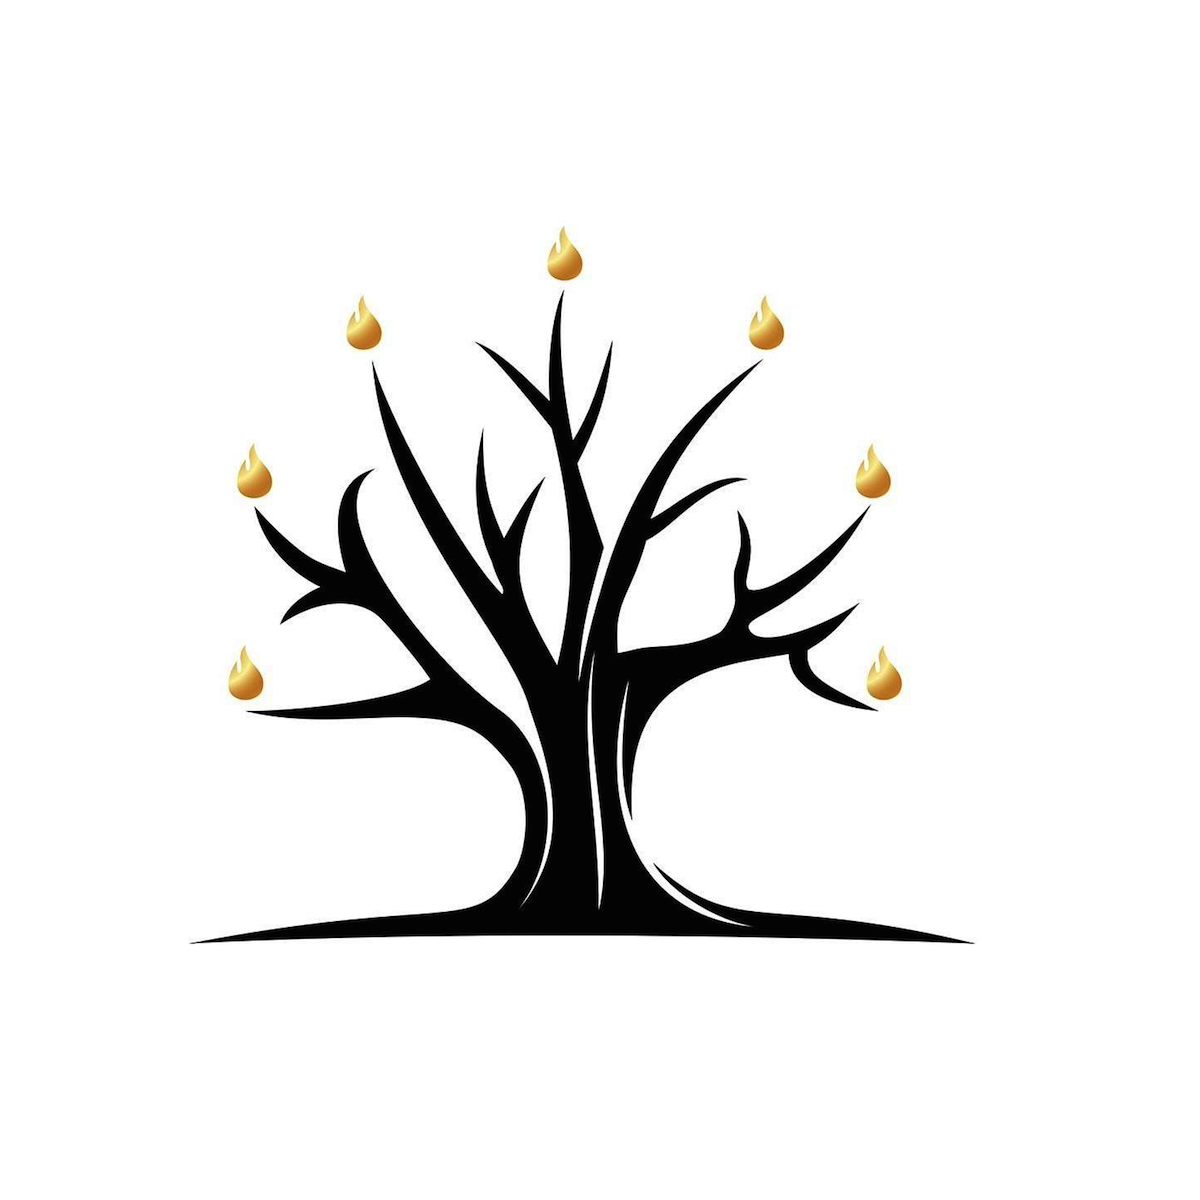 The Greatwood Candle Company brand logo